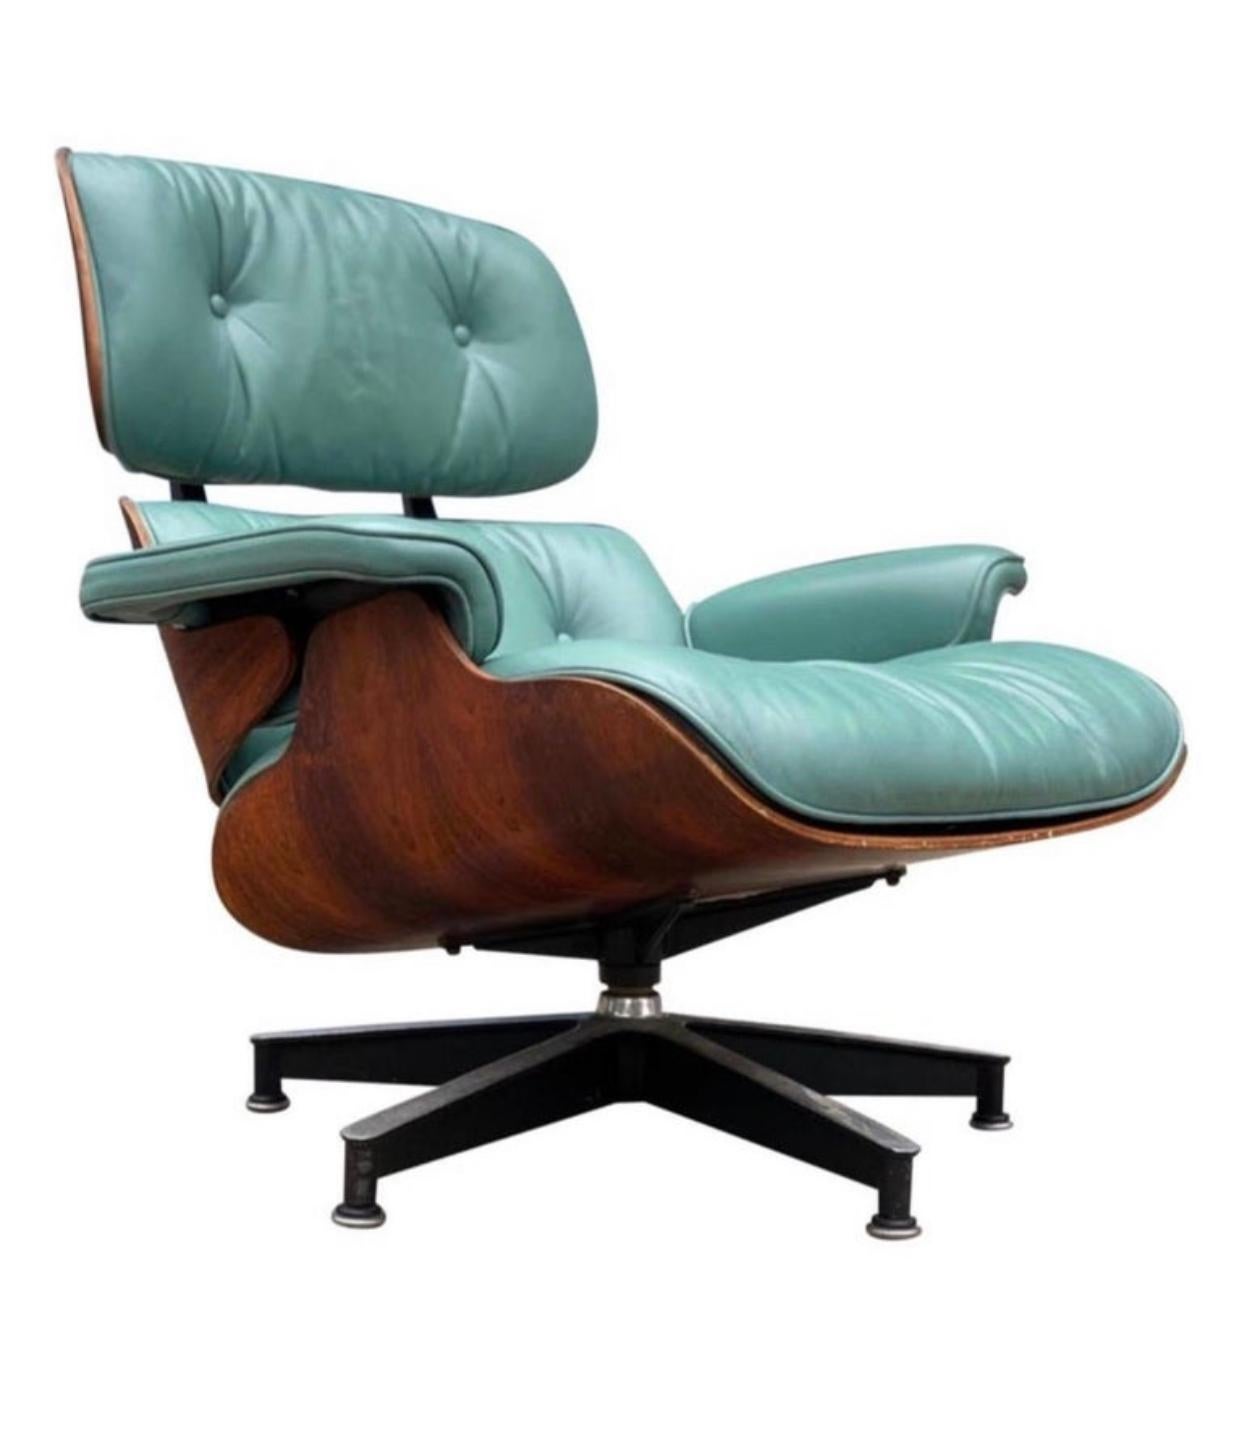 Incredibly vibrant and elegant edition of the Classic Herman Miller Eames lounge chair and ottoman with original Herman Miller label. Custom new leather cushions in superb condition. This shade is not a color we have ever come across before. All